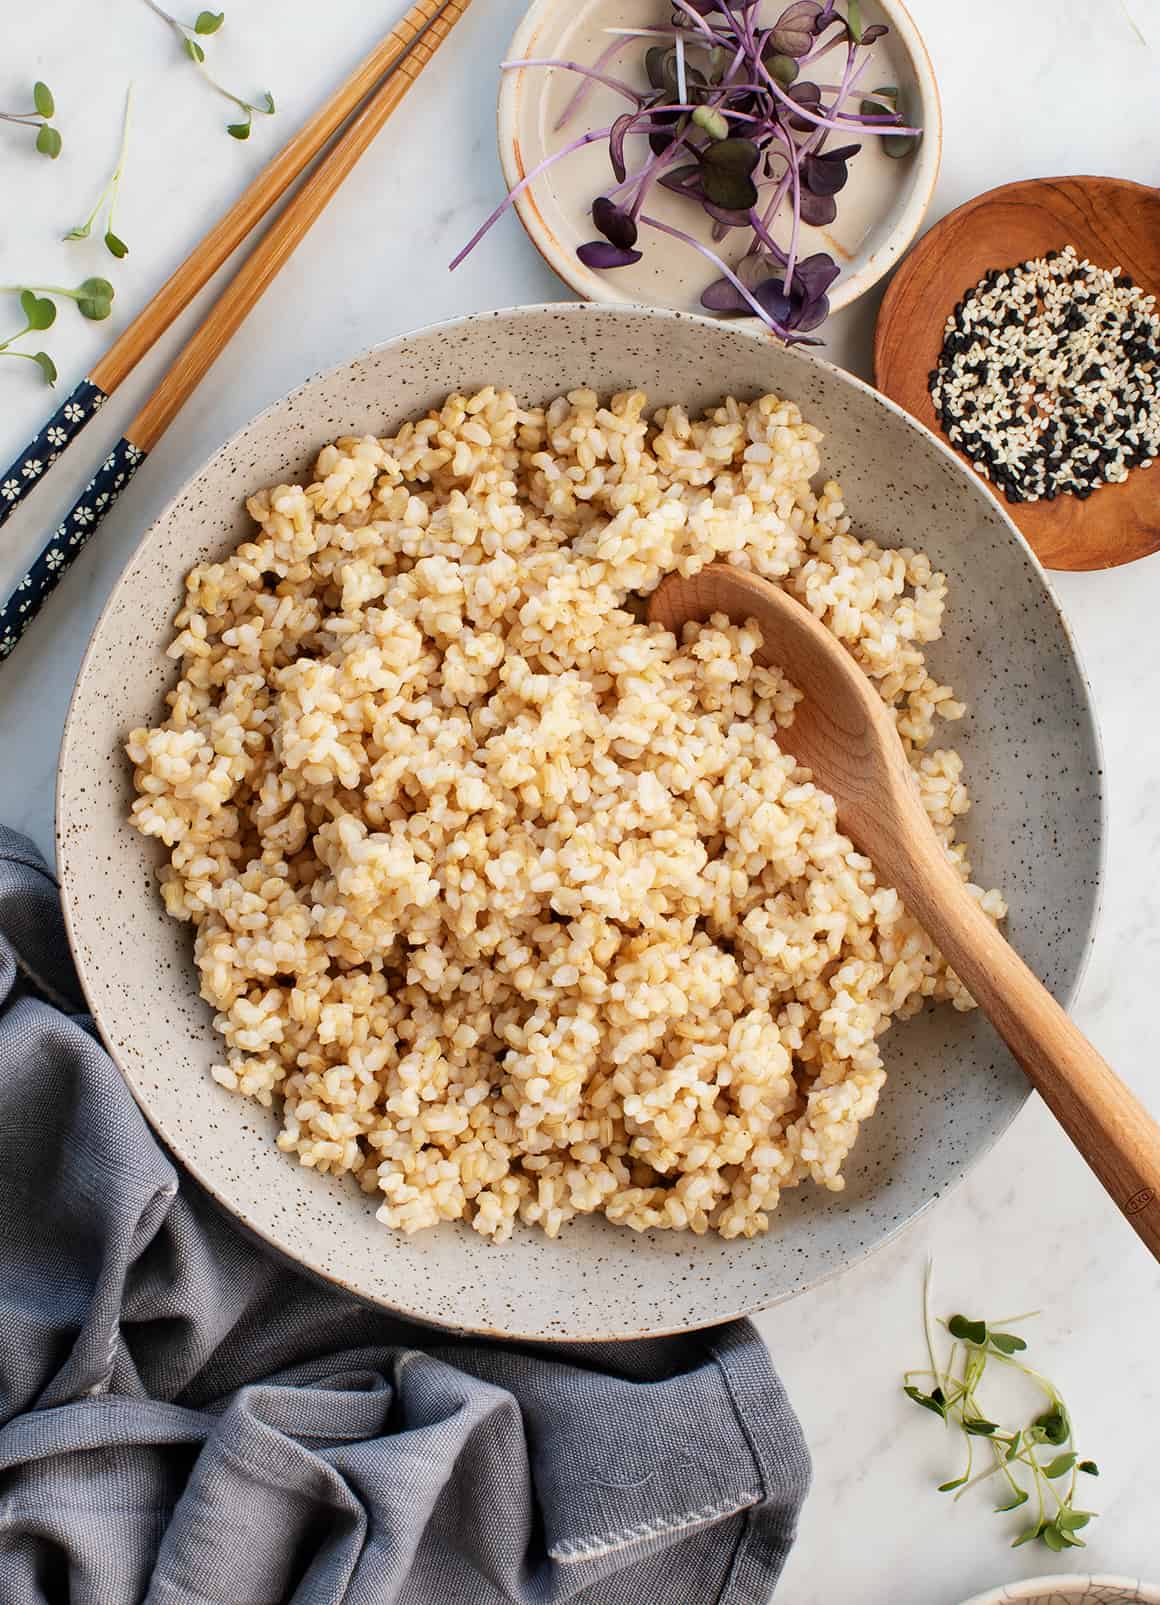 Instant pot brown rice in bowl with wooden spoon